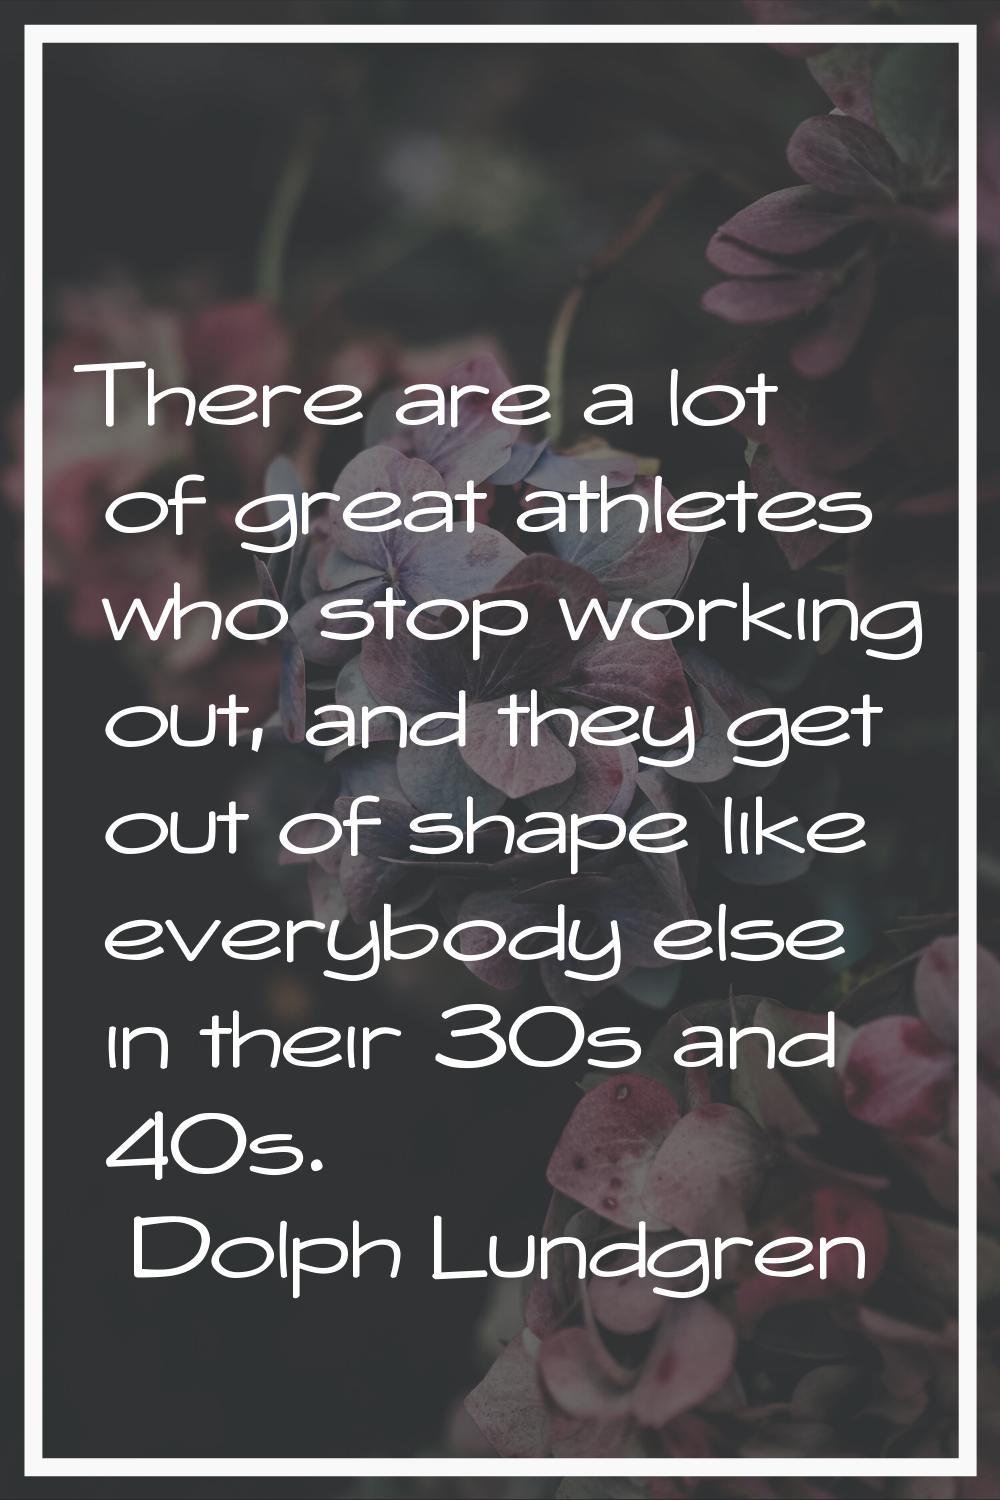 There are a lot of great athletes who stop working out, and they get out of shape like everybody el